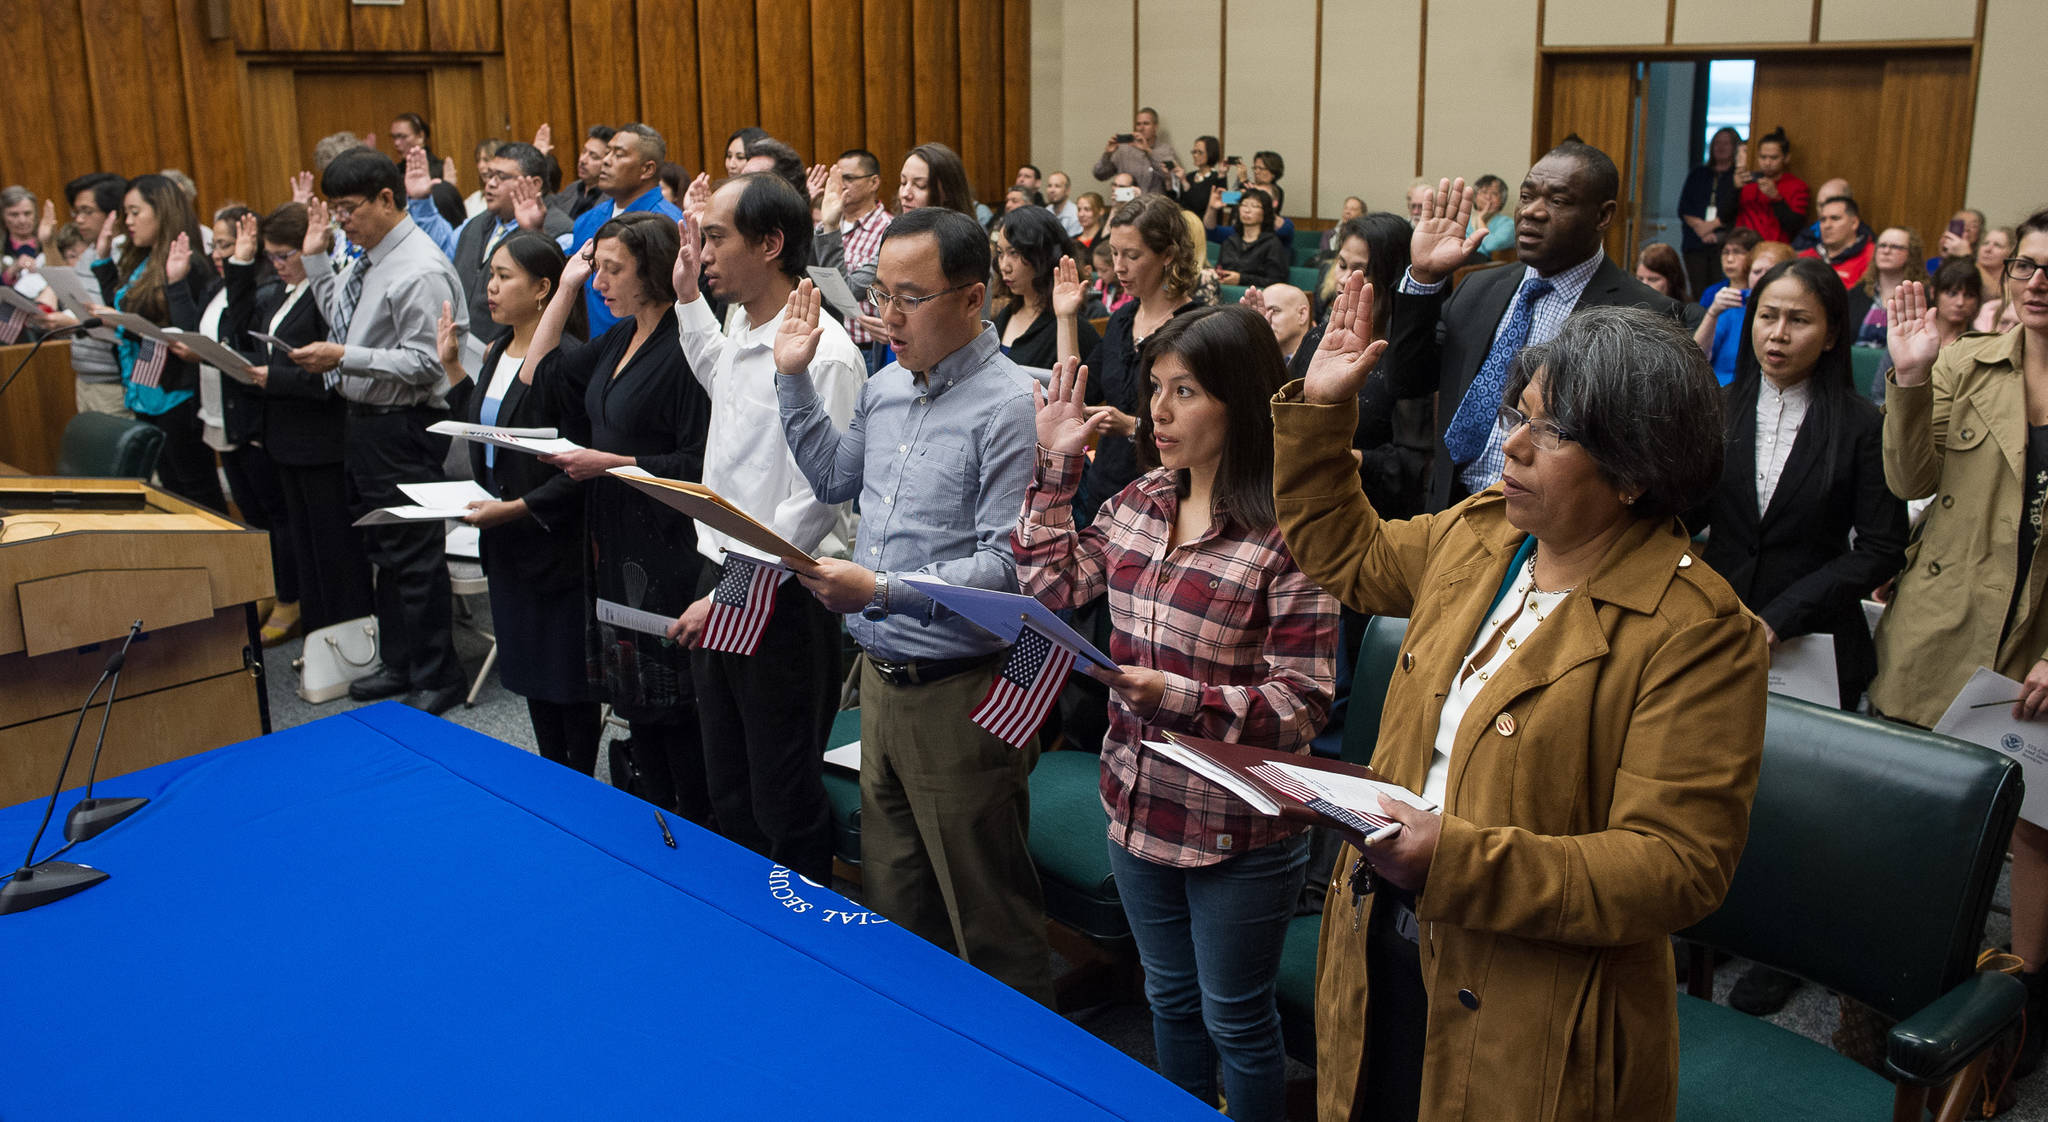 Over 30 people from around the world participate in a Naturalization Ceremony overseen by Magistrate Judge Scott Oravec of Fairbanks at the Robert Boochever Federal Courthouse in Juneau on Friday, Aug. 25, 2017. (Michael Penn | Juneau Empire)